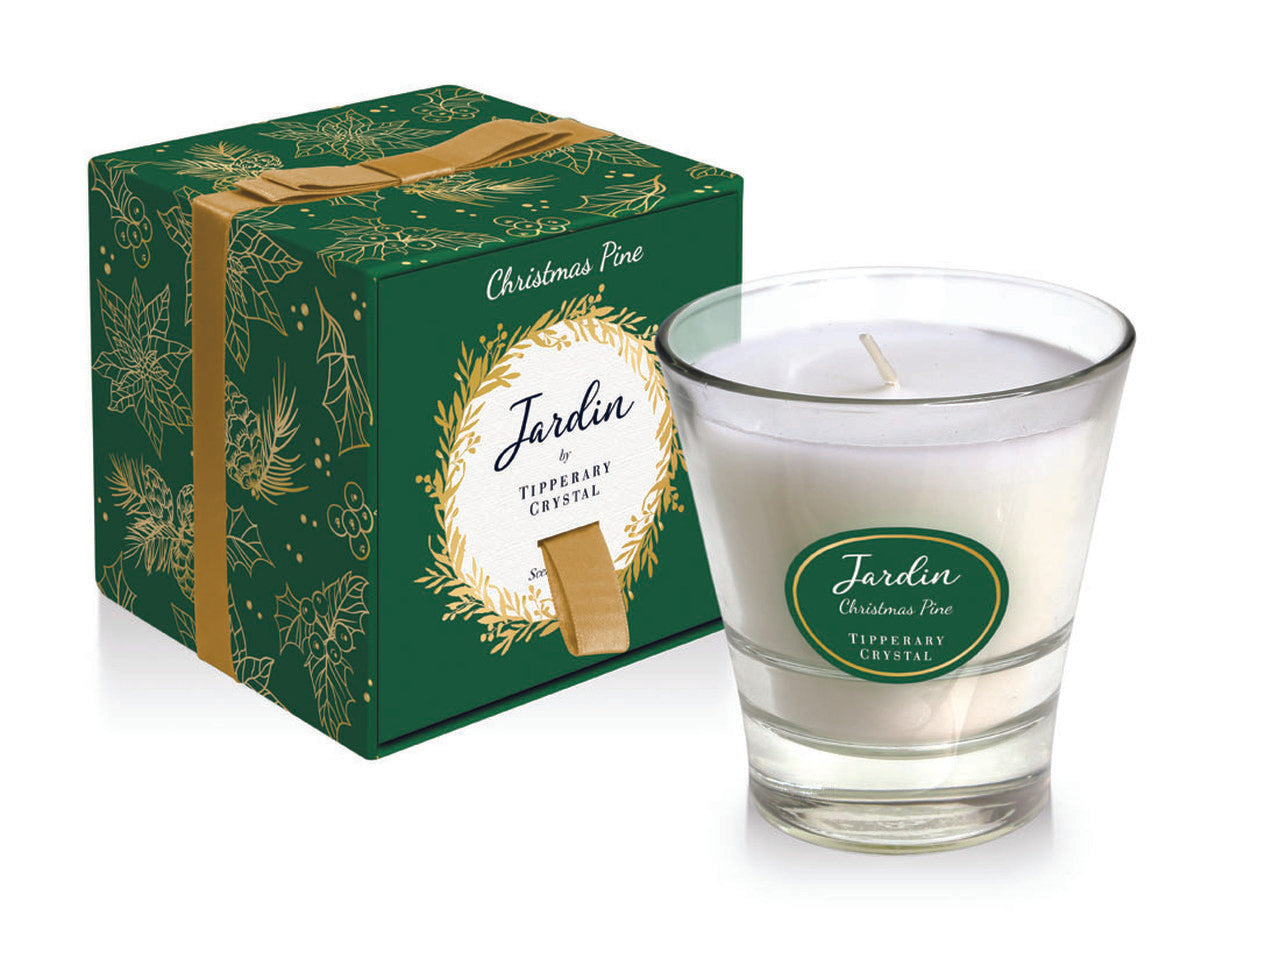 Tipperary Crystal Jardin Christmas Pine Candle 300g